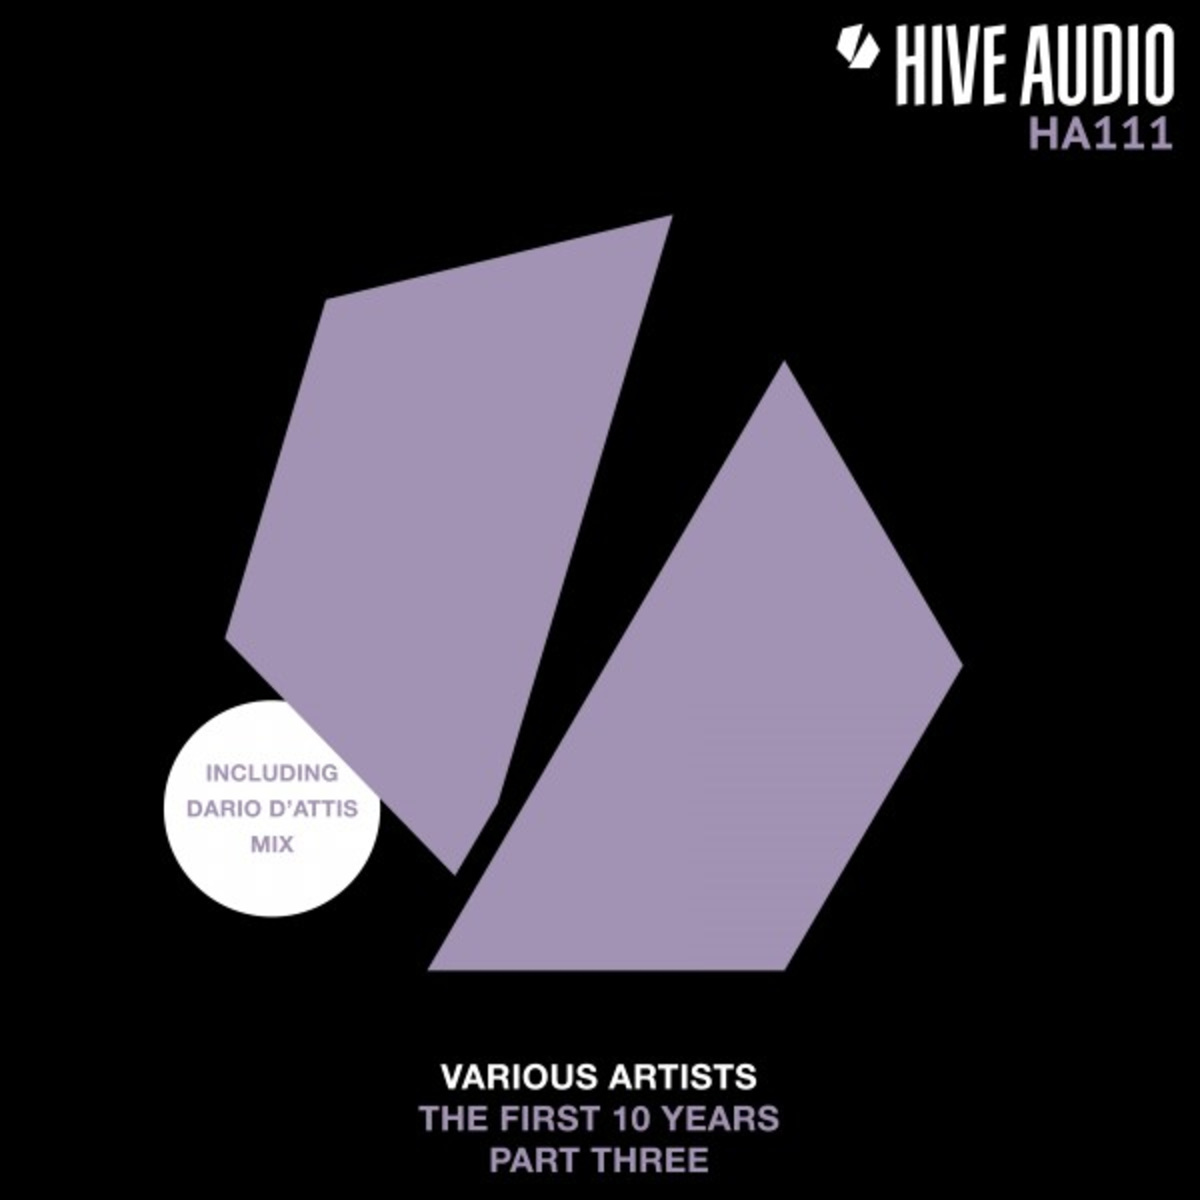 Download VA - Hive Audio the First 10 Years, Pt. 3 on Electrobuzz